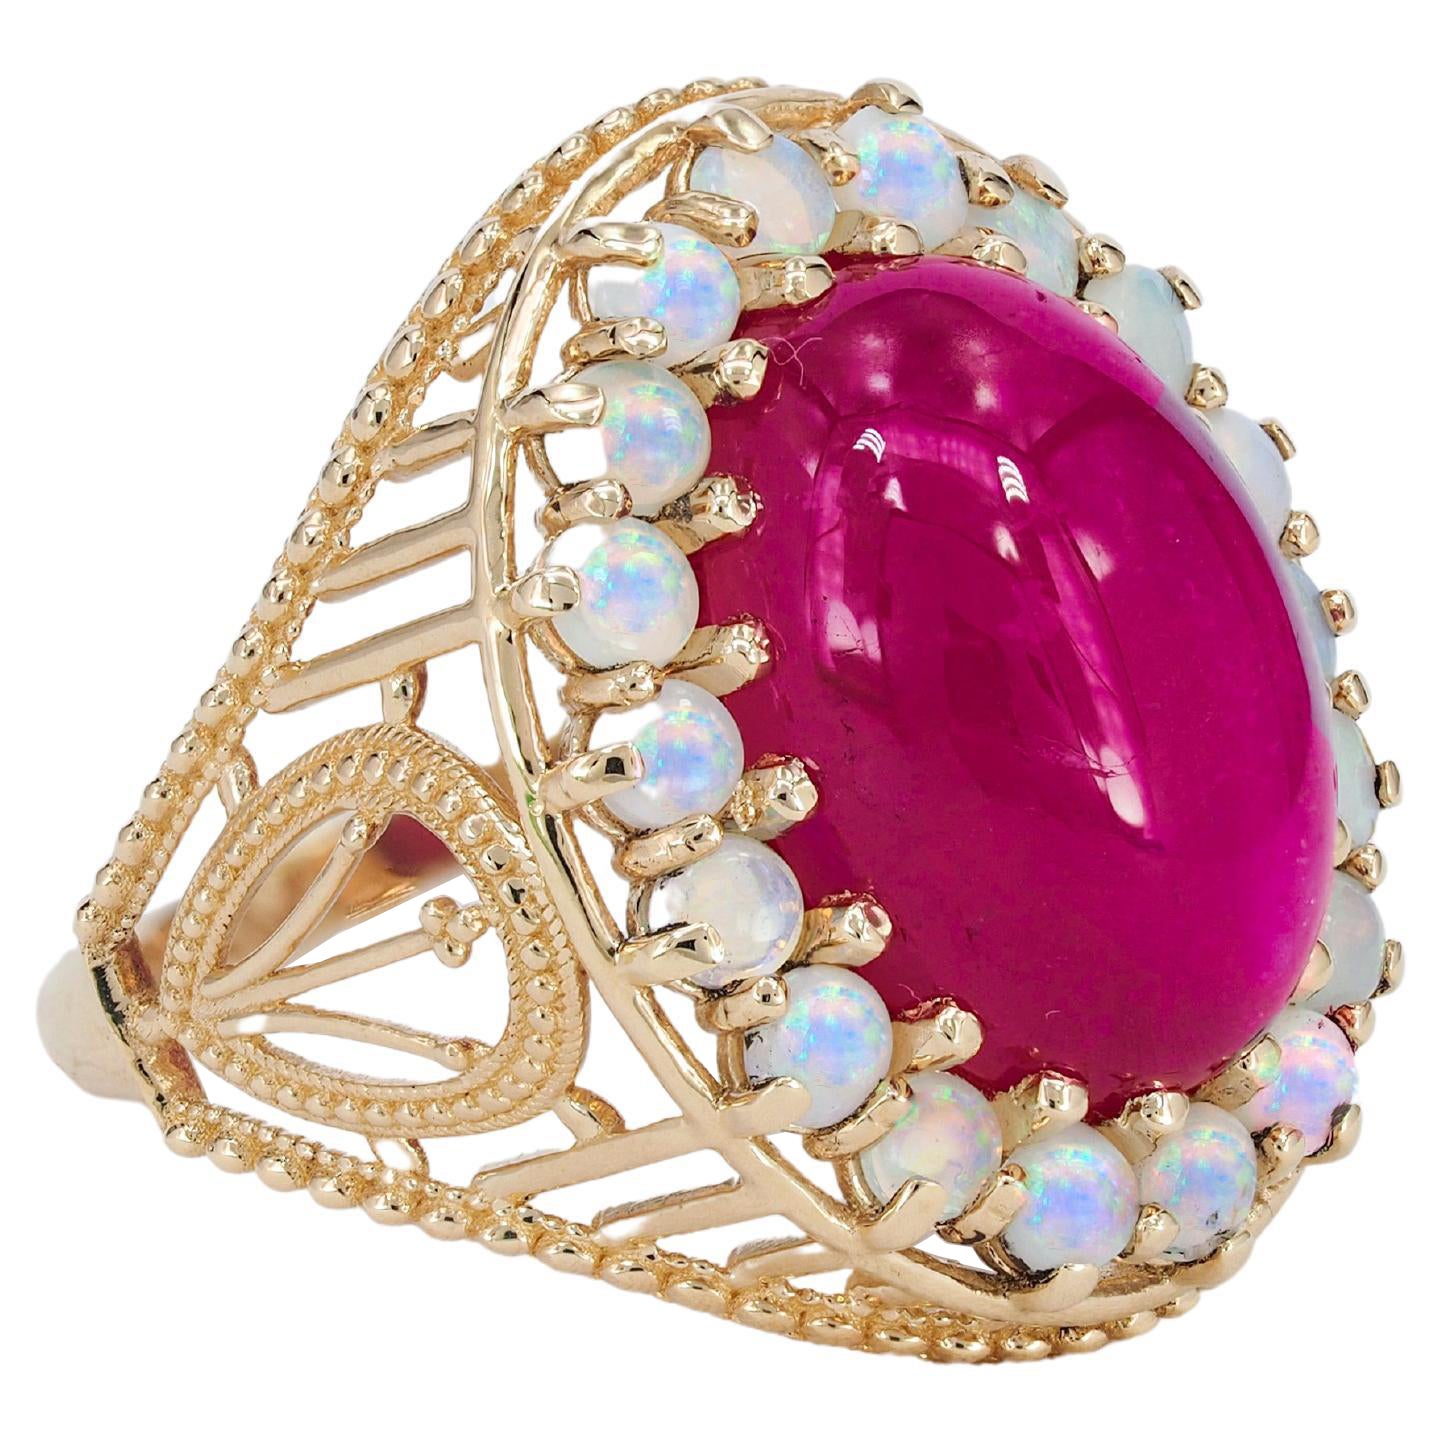 For Sale:  14k Massive Gold Ring with Cabochon Ruby and Opals, Vintage Inspired Ring